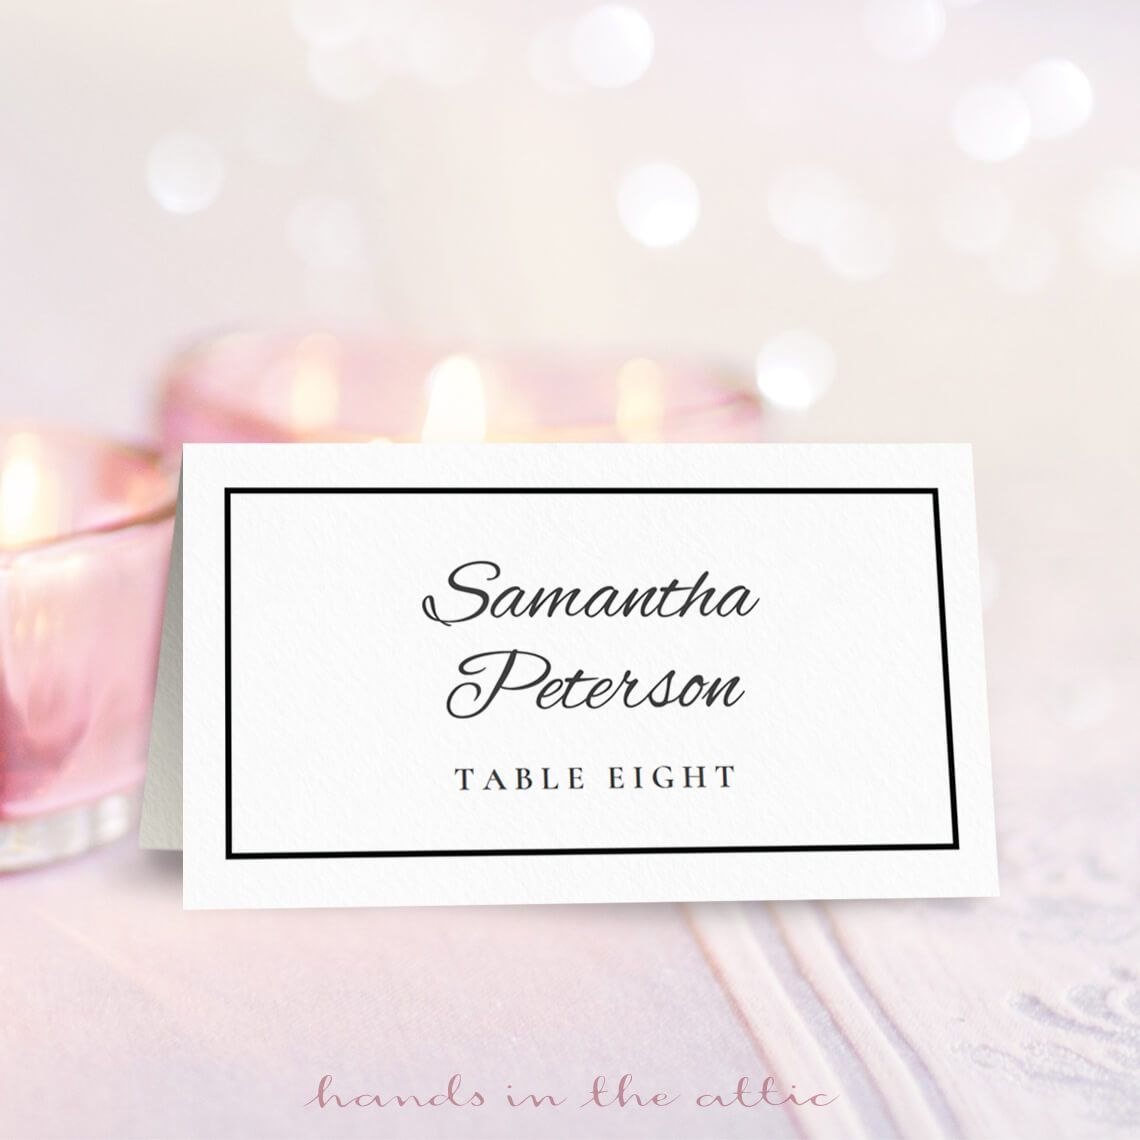 Wedding Place Card Template  Free On Handsintheattic  Free intended for Table Place Card Template Free Download